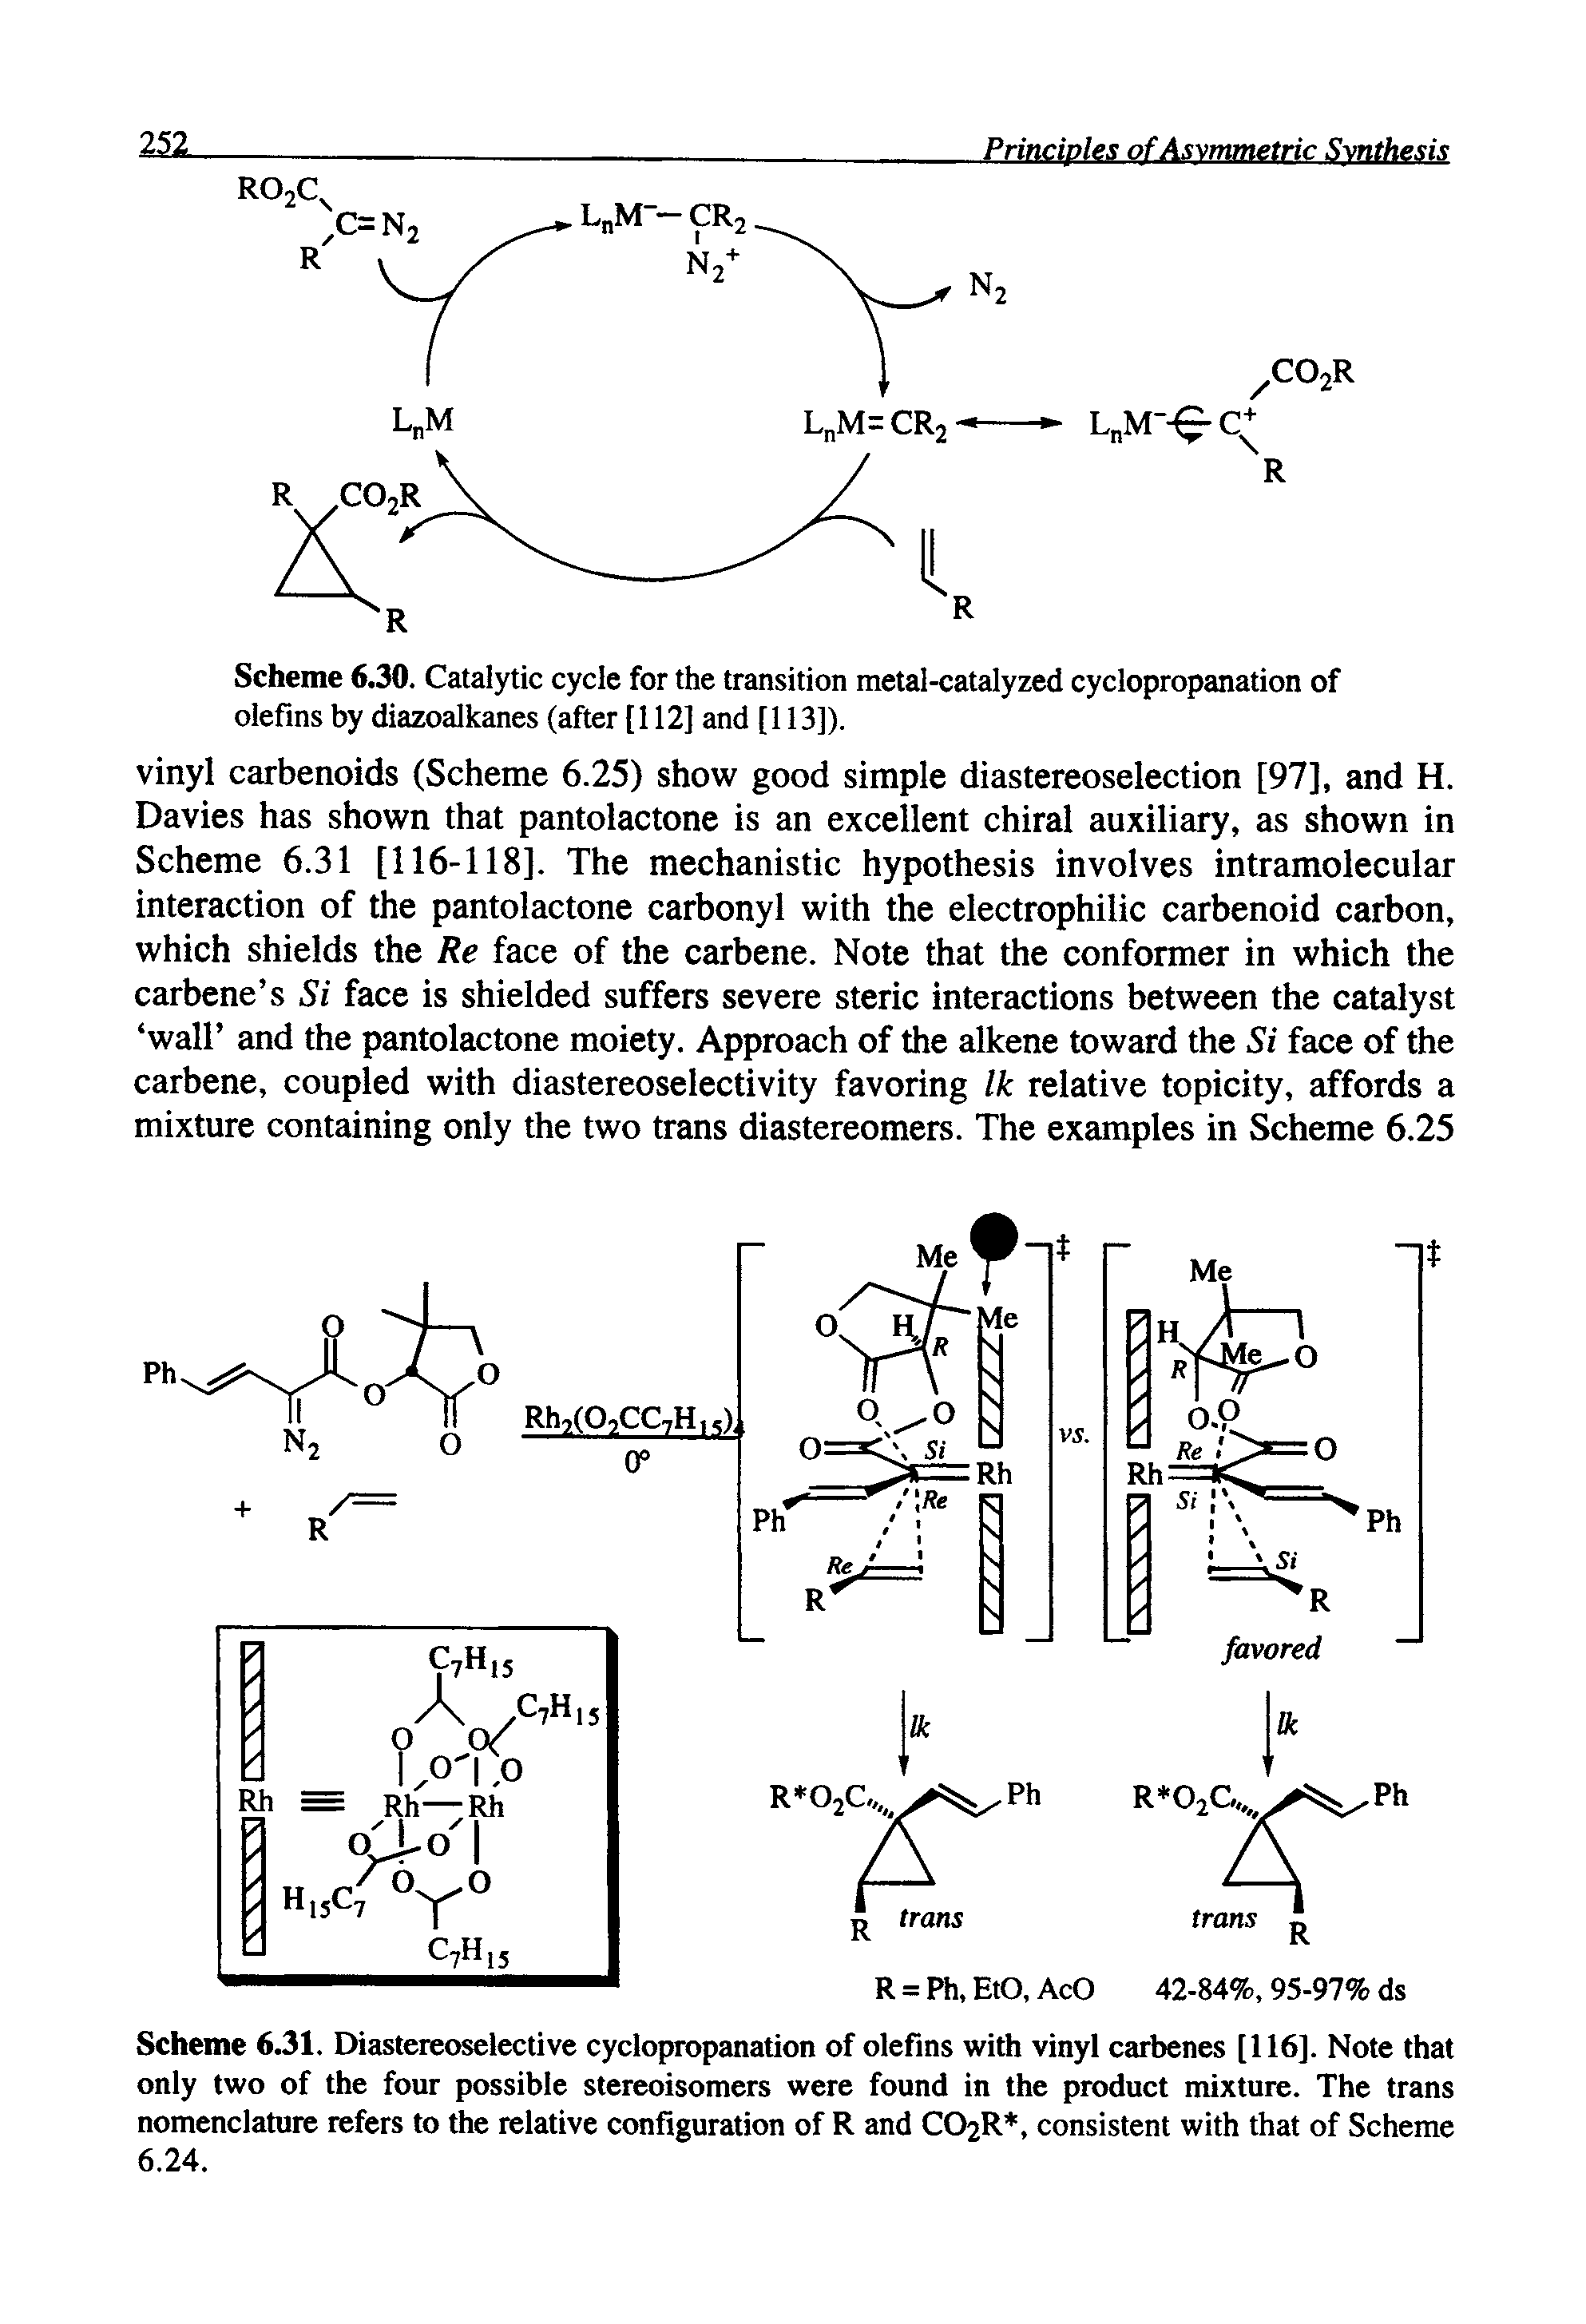 Scheme 6.31. Diastereoselective cyclopropanation of olefins with vinyl carbenes [116]. Note that only two of the four possible stereoisomers were found in the product mixture. The trans nomenclature refers to the relative configuration of R and CO2R, consistent with that of Scheme 6.24.